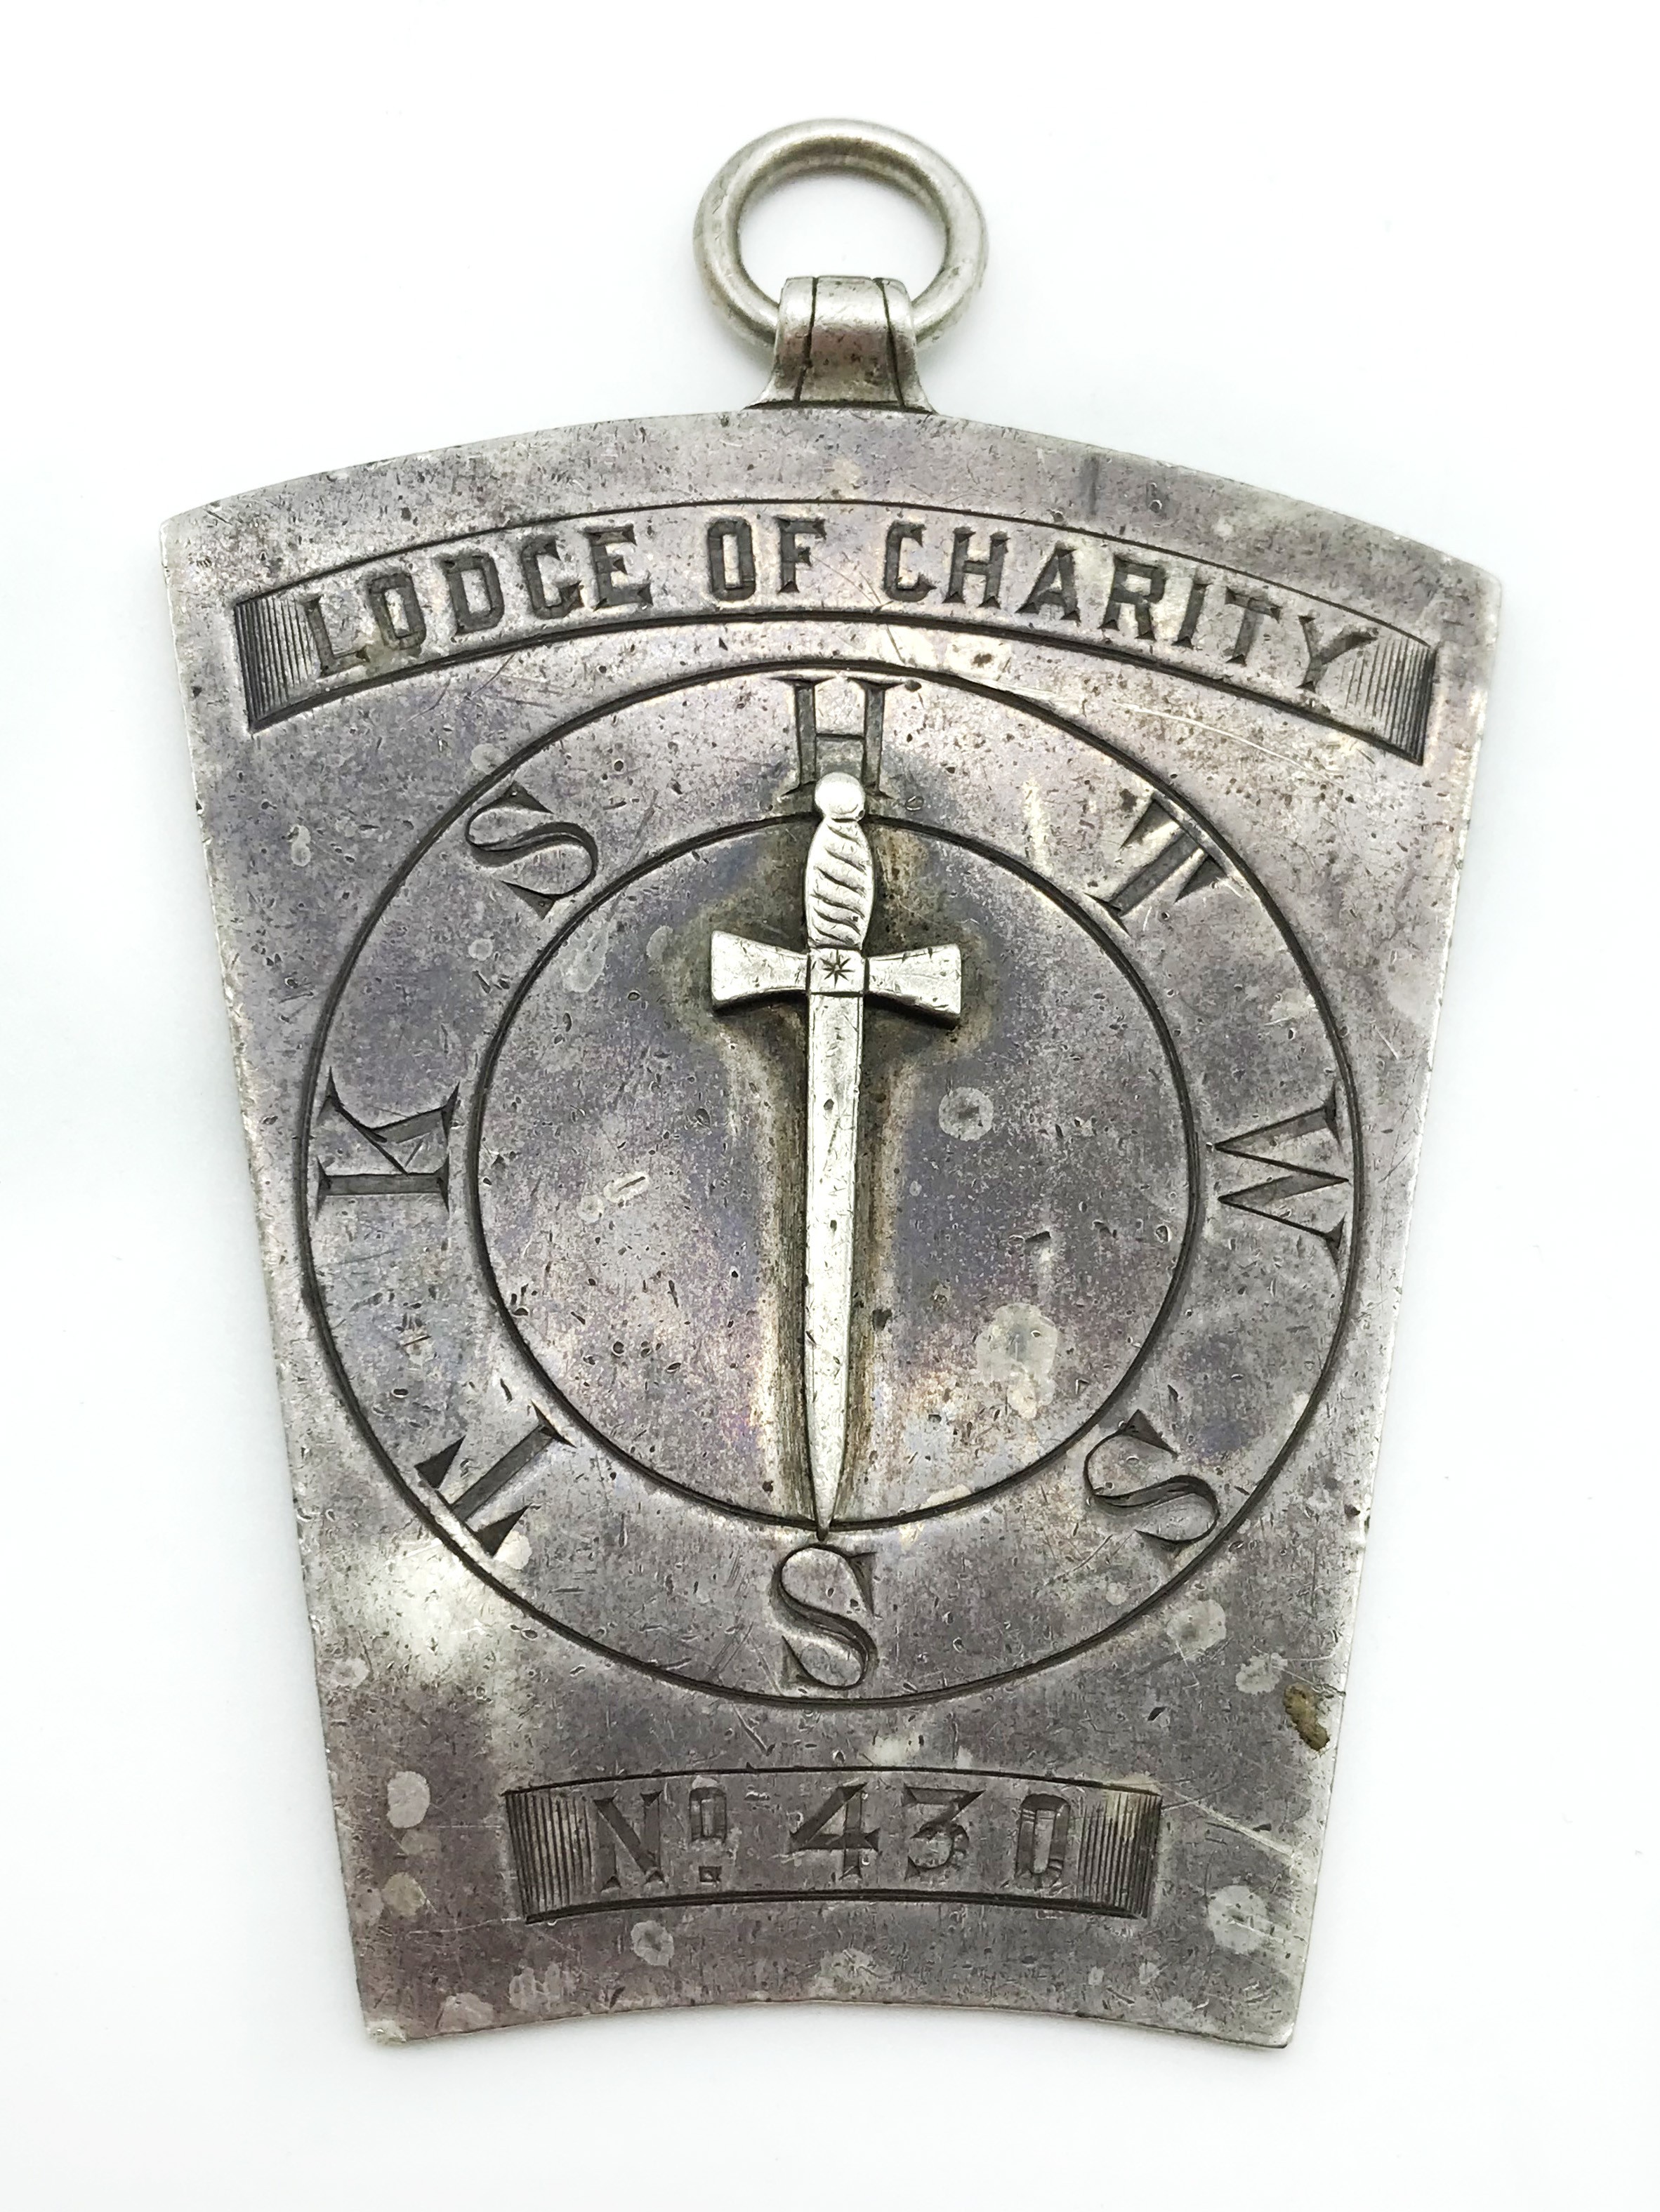 LARGE HALLMARKED SILVER MASONIC JEWEL FOR LODGE OF CHARITY